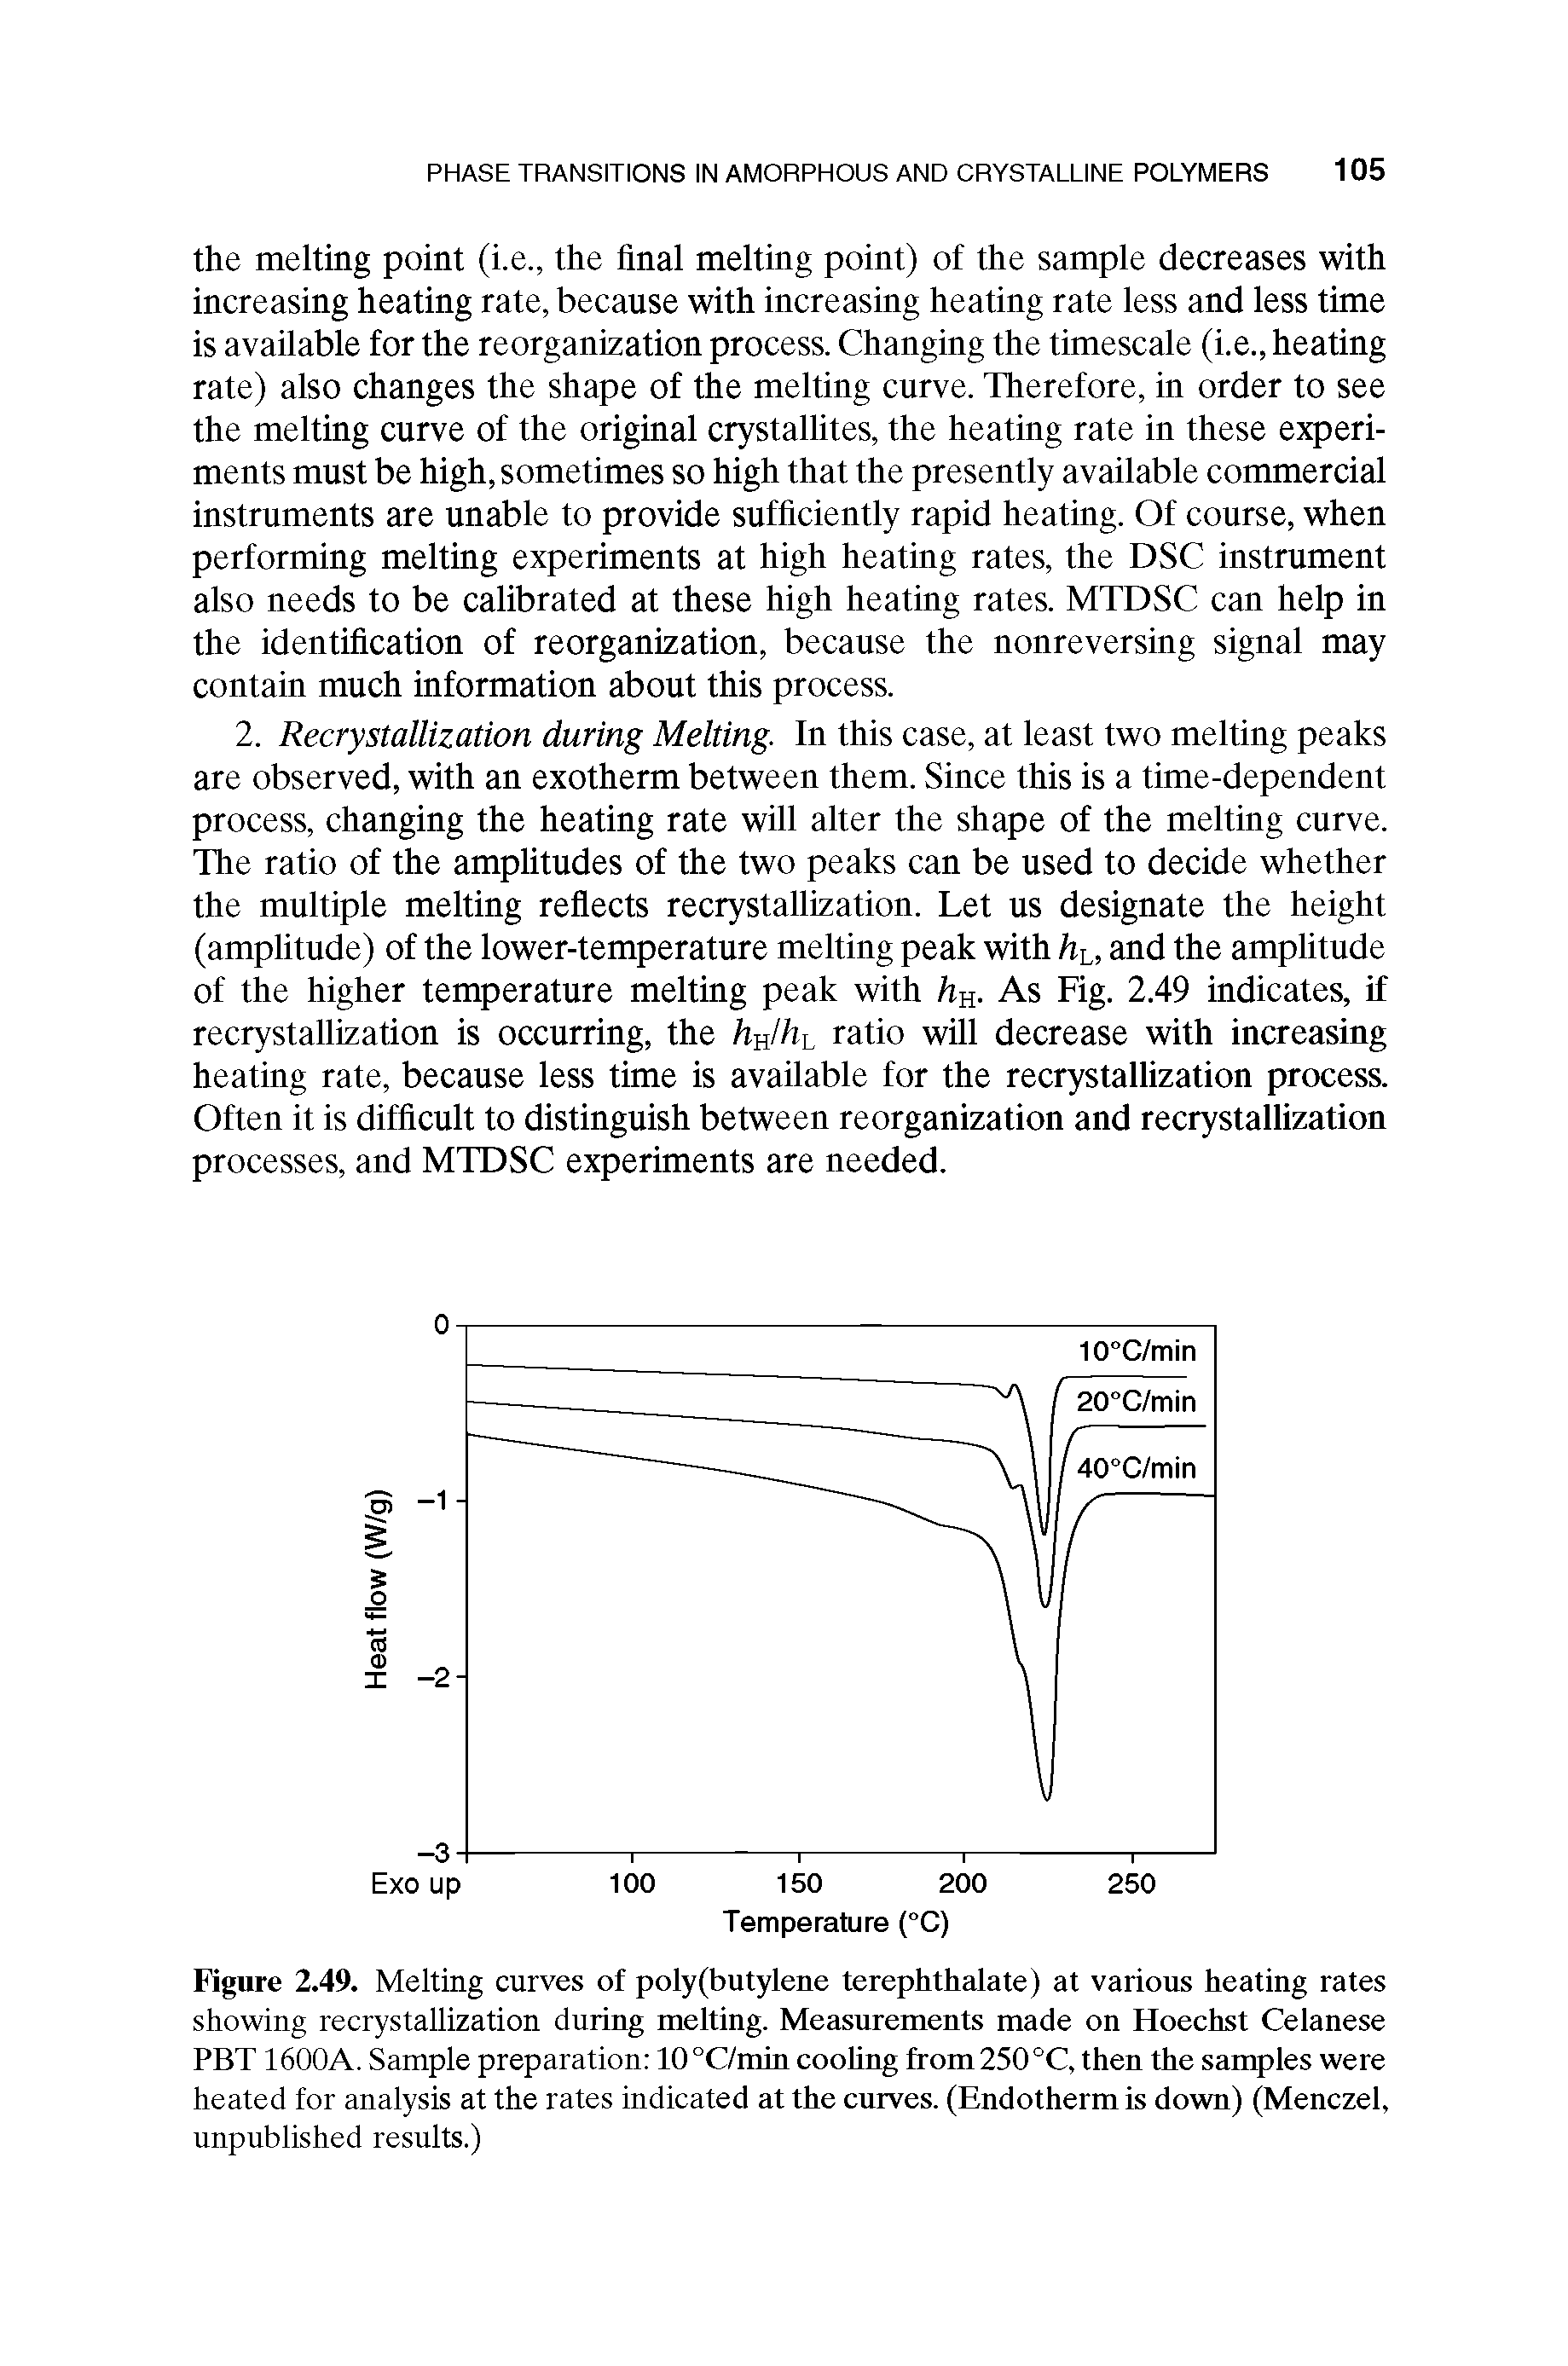 Figure 2.49. Melting curves of poly(butylene terephthalate) at various heating rates showing recrystaUization during melting. Measurements made on Hoechst Celanese PBT1600A. Sample preparation 10°Omin coohng from 250°C, then the samples were heated for analysis at the rates indicated at the curves. (Endotherm is down) (Menczel, unpublished results.)...